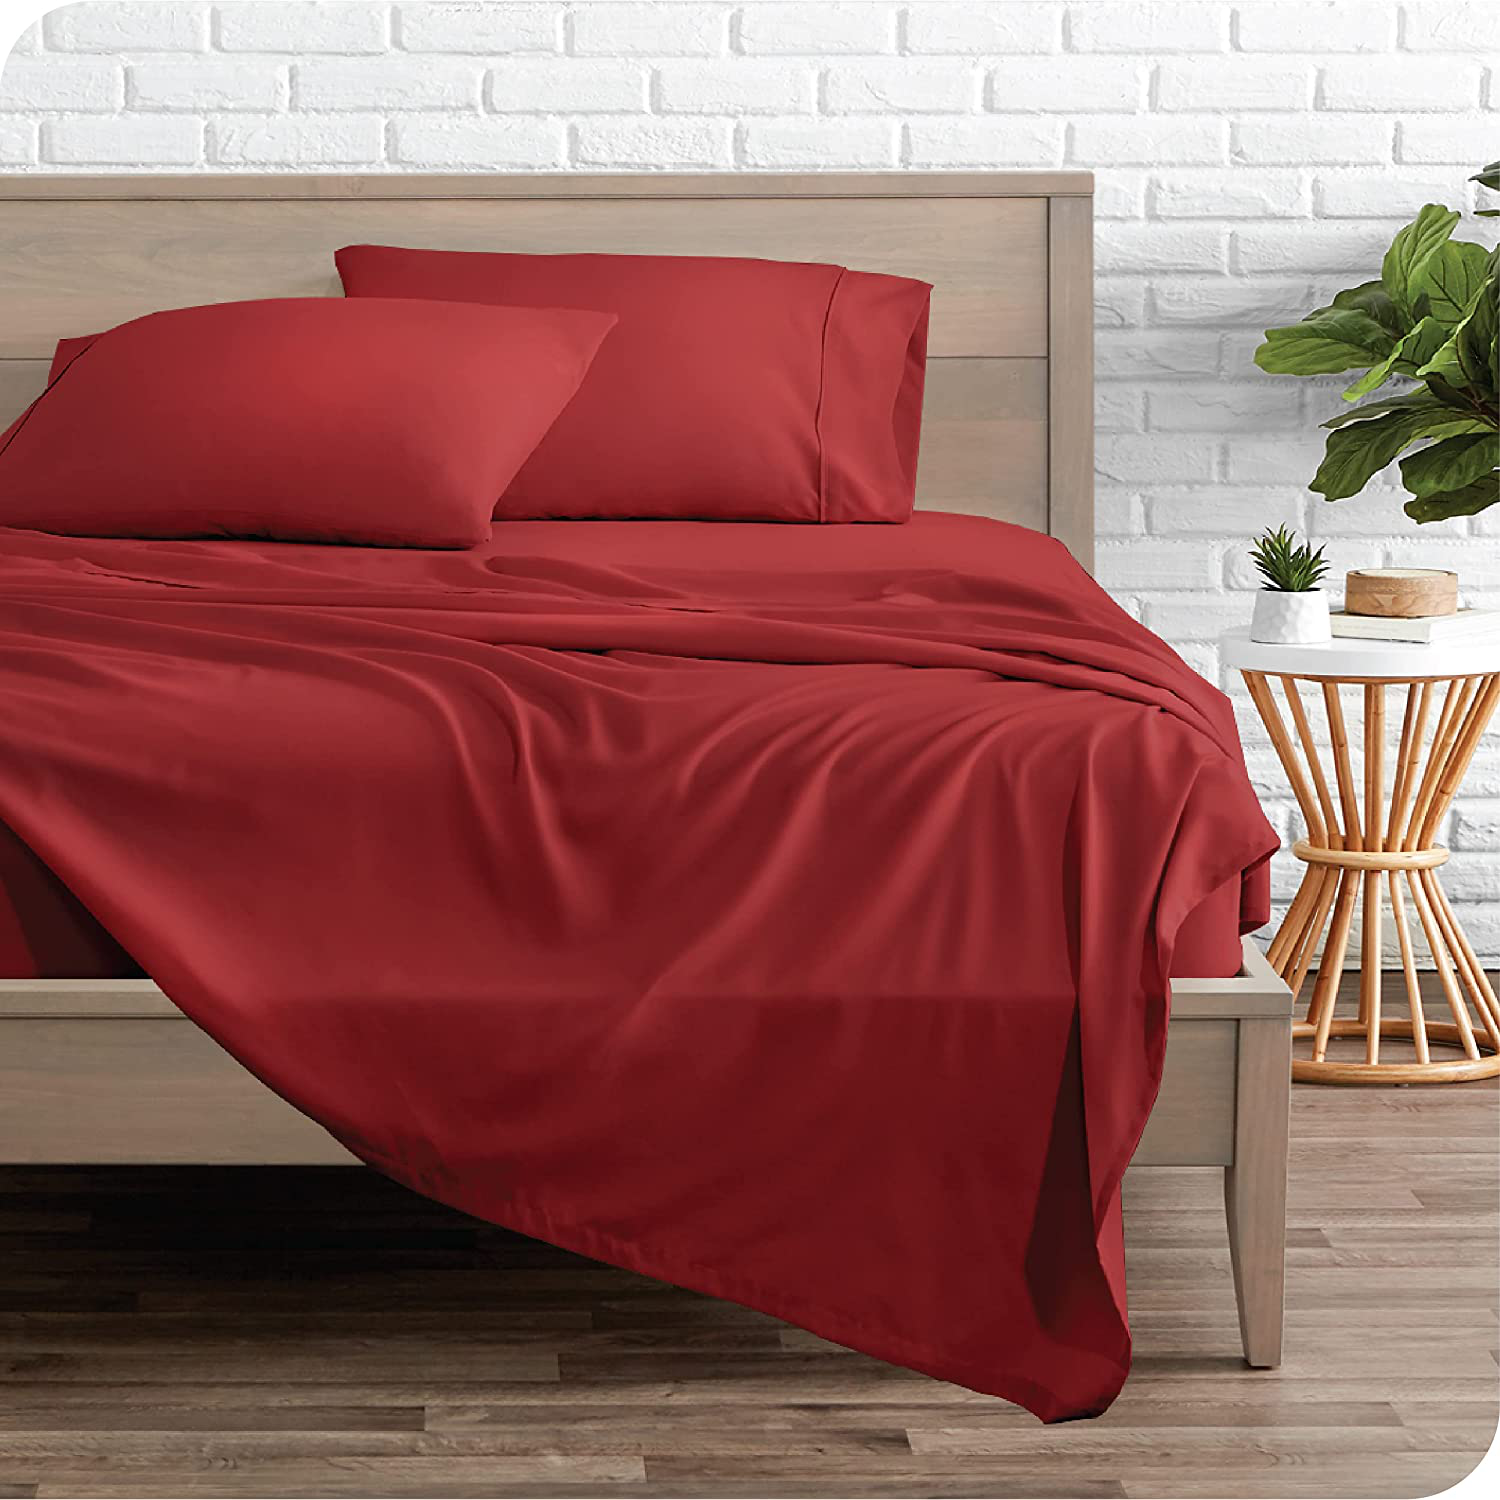 Bare Home Full XL Sheet Set - Premium 1800 Ultra-Soft Microfiber Full Extra Long Bed Sheets - Double Brushed - Full XL Sheets Set - Deep Pocket - Bedding Sheets & Pillowcases (Full XL, Red)